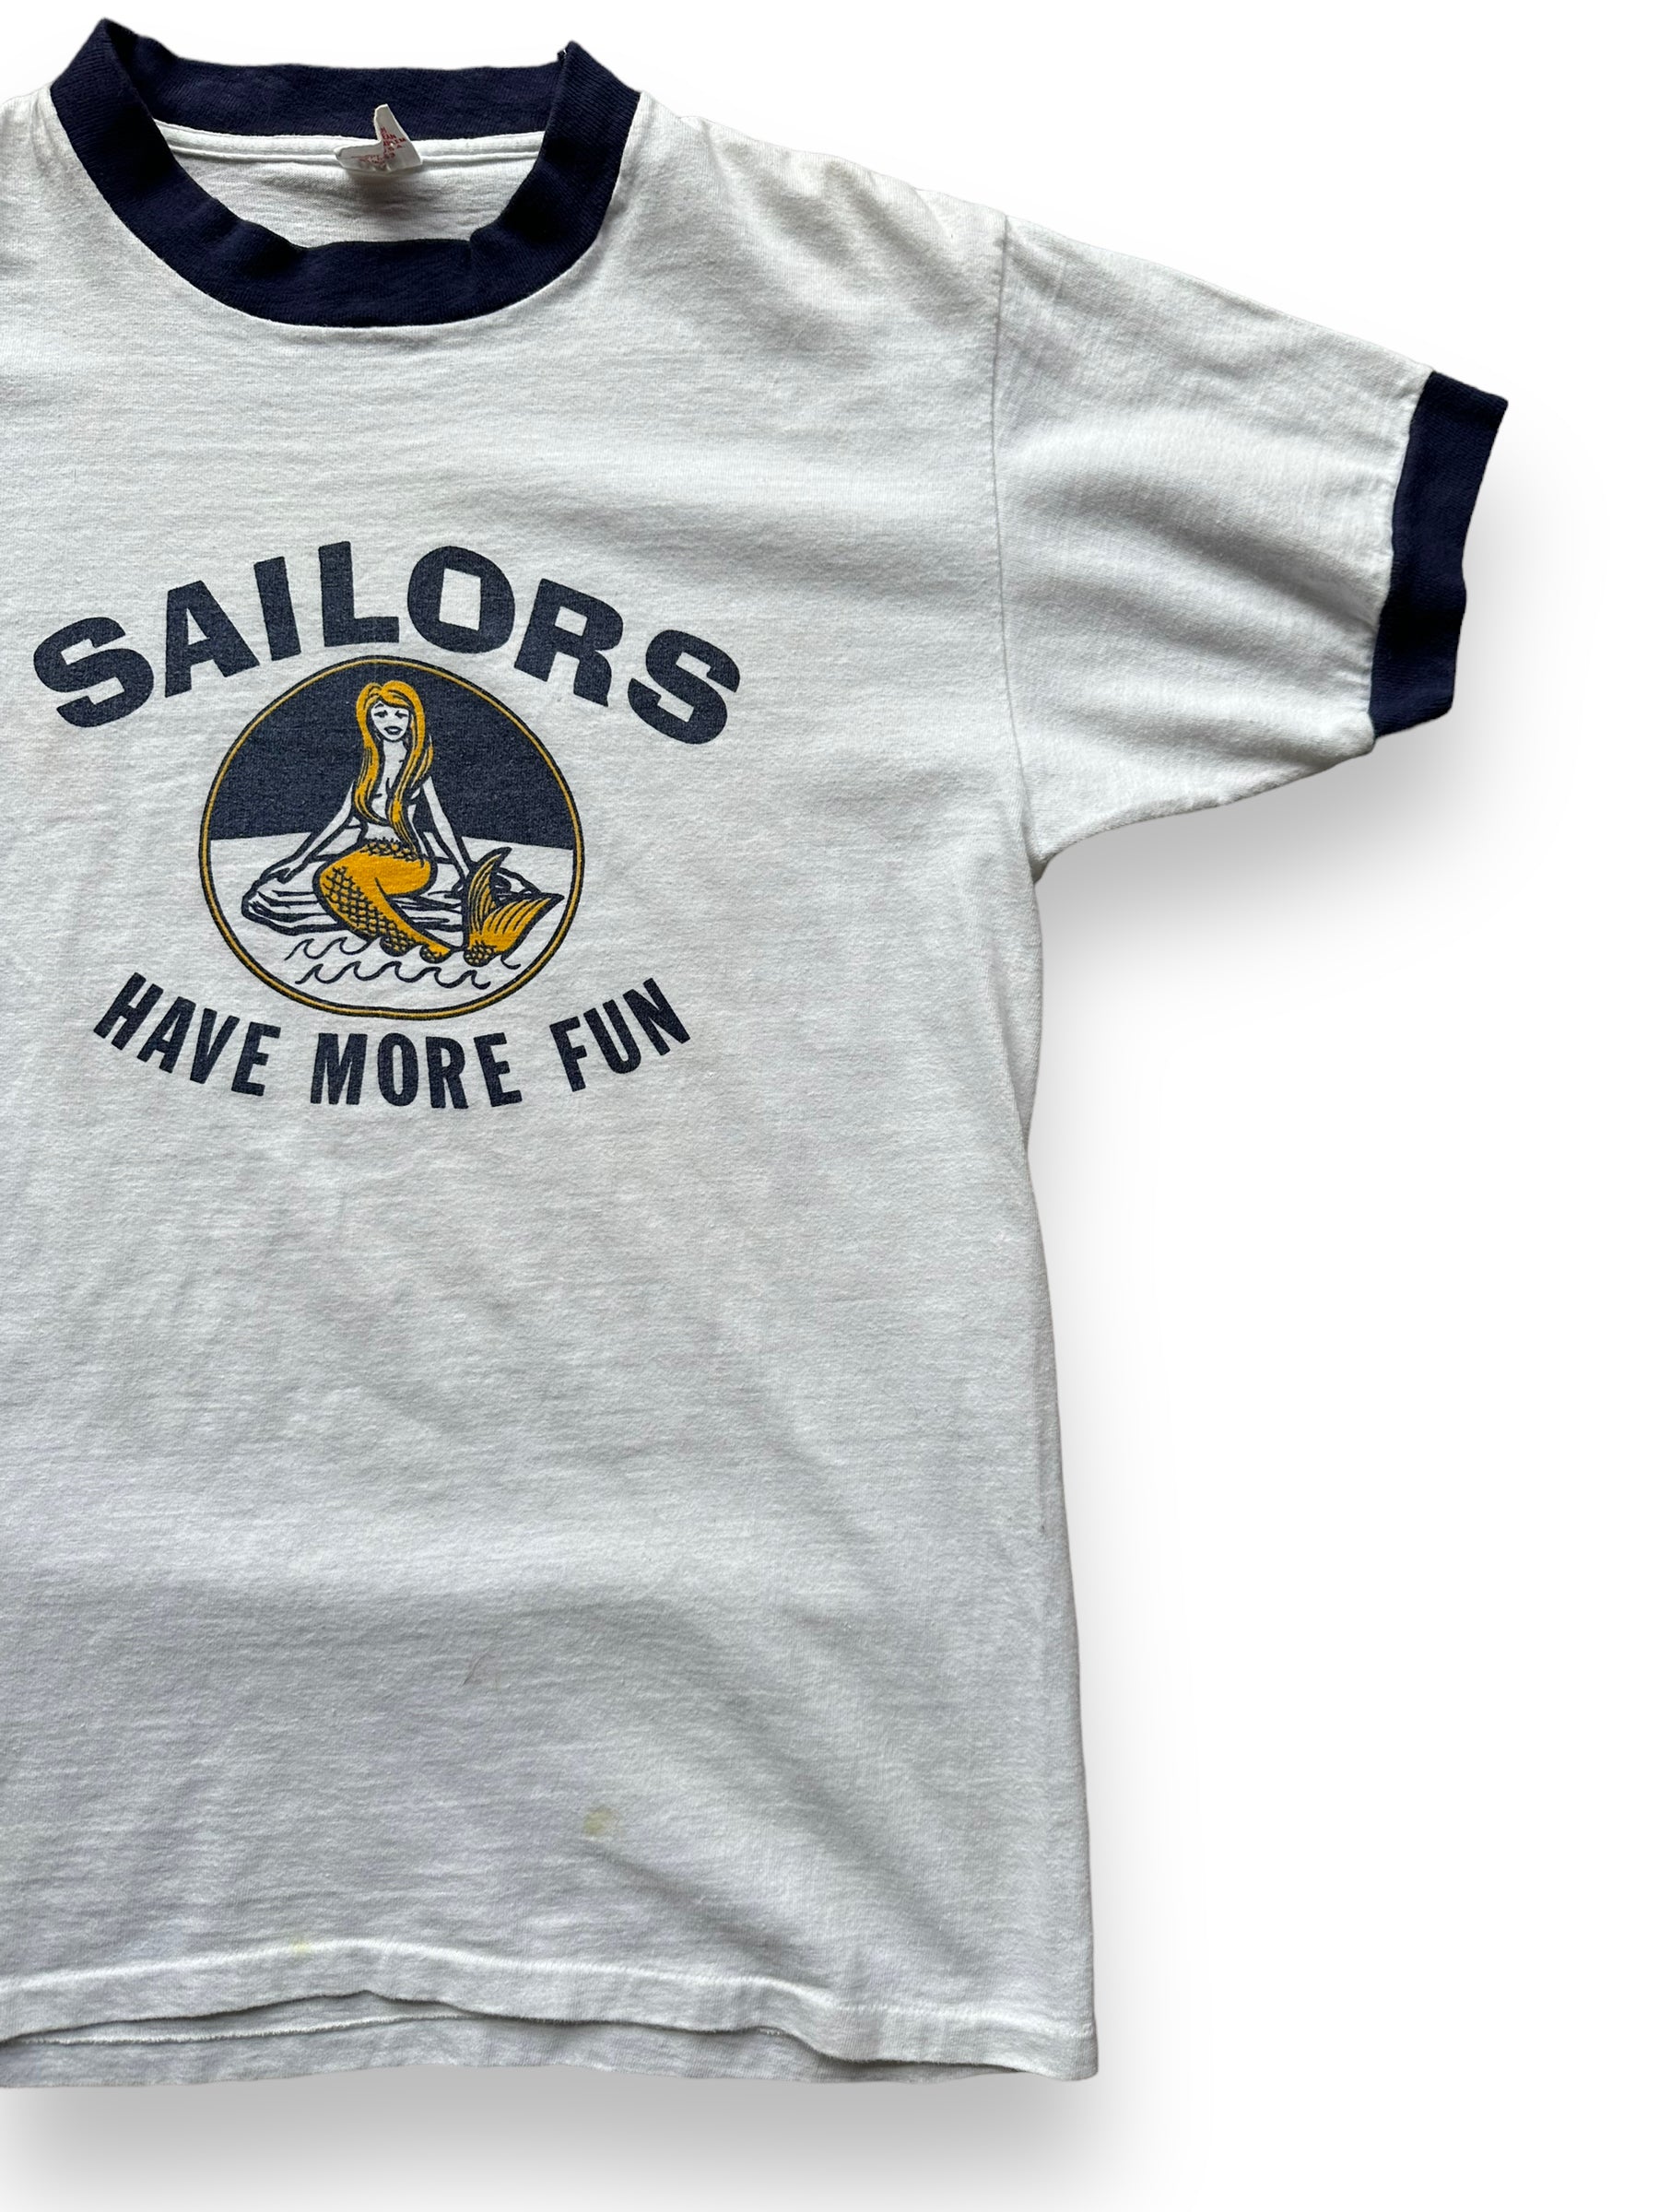 Front Left View of Vintage Sailors Have More Fun Ringer Tee SZ M | Vintage T-Shirts Seattle | Barn Owl Vintage Tees Seattle